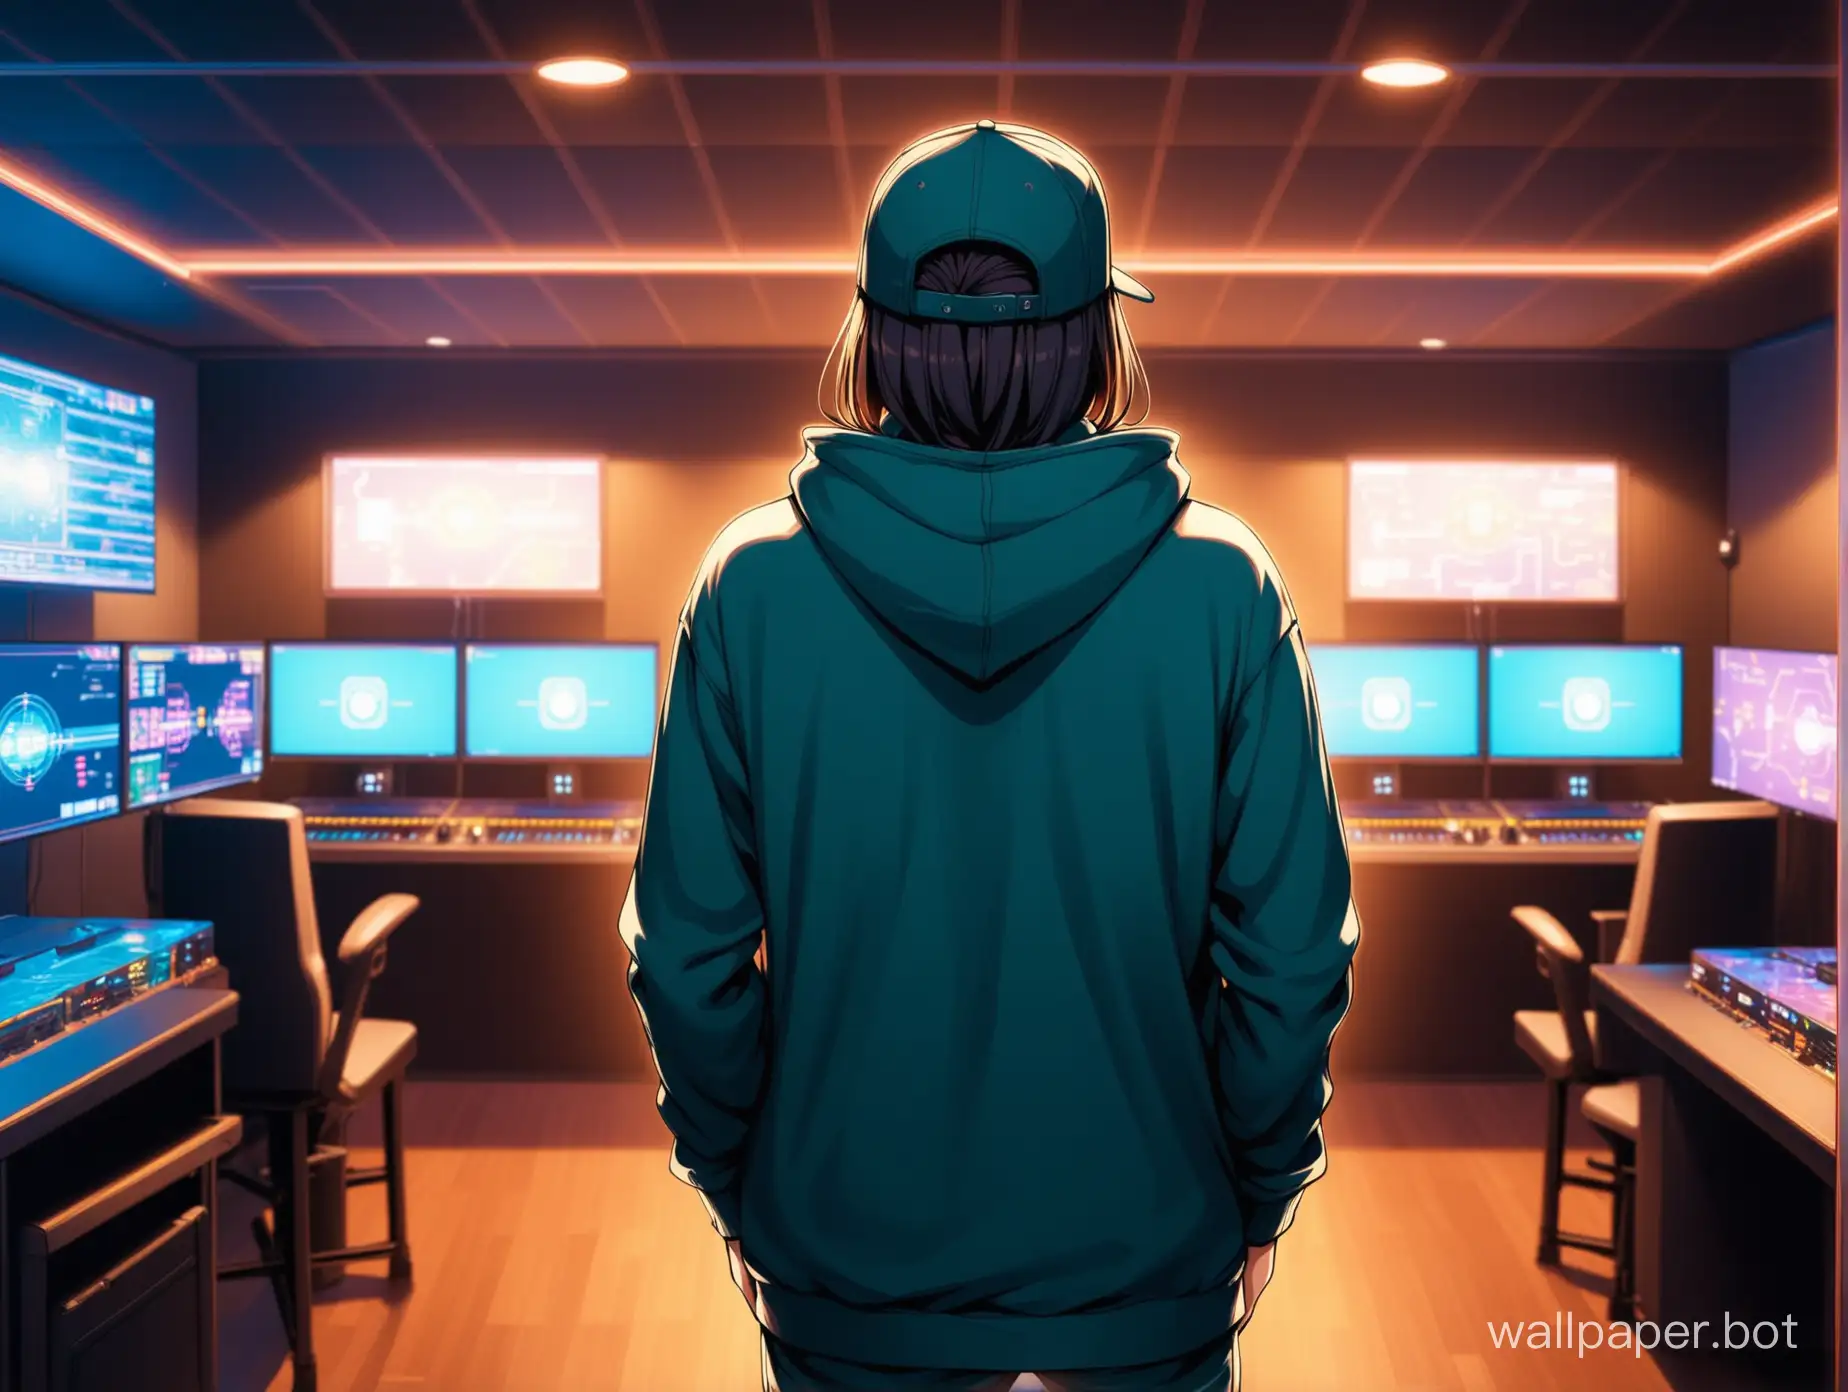 Gamer-in-Hoodie-and-Cap-Standing-in-Virtual-Reality-Game-Room